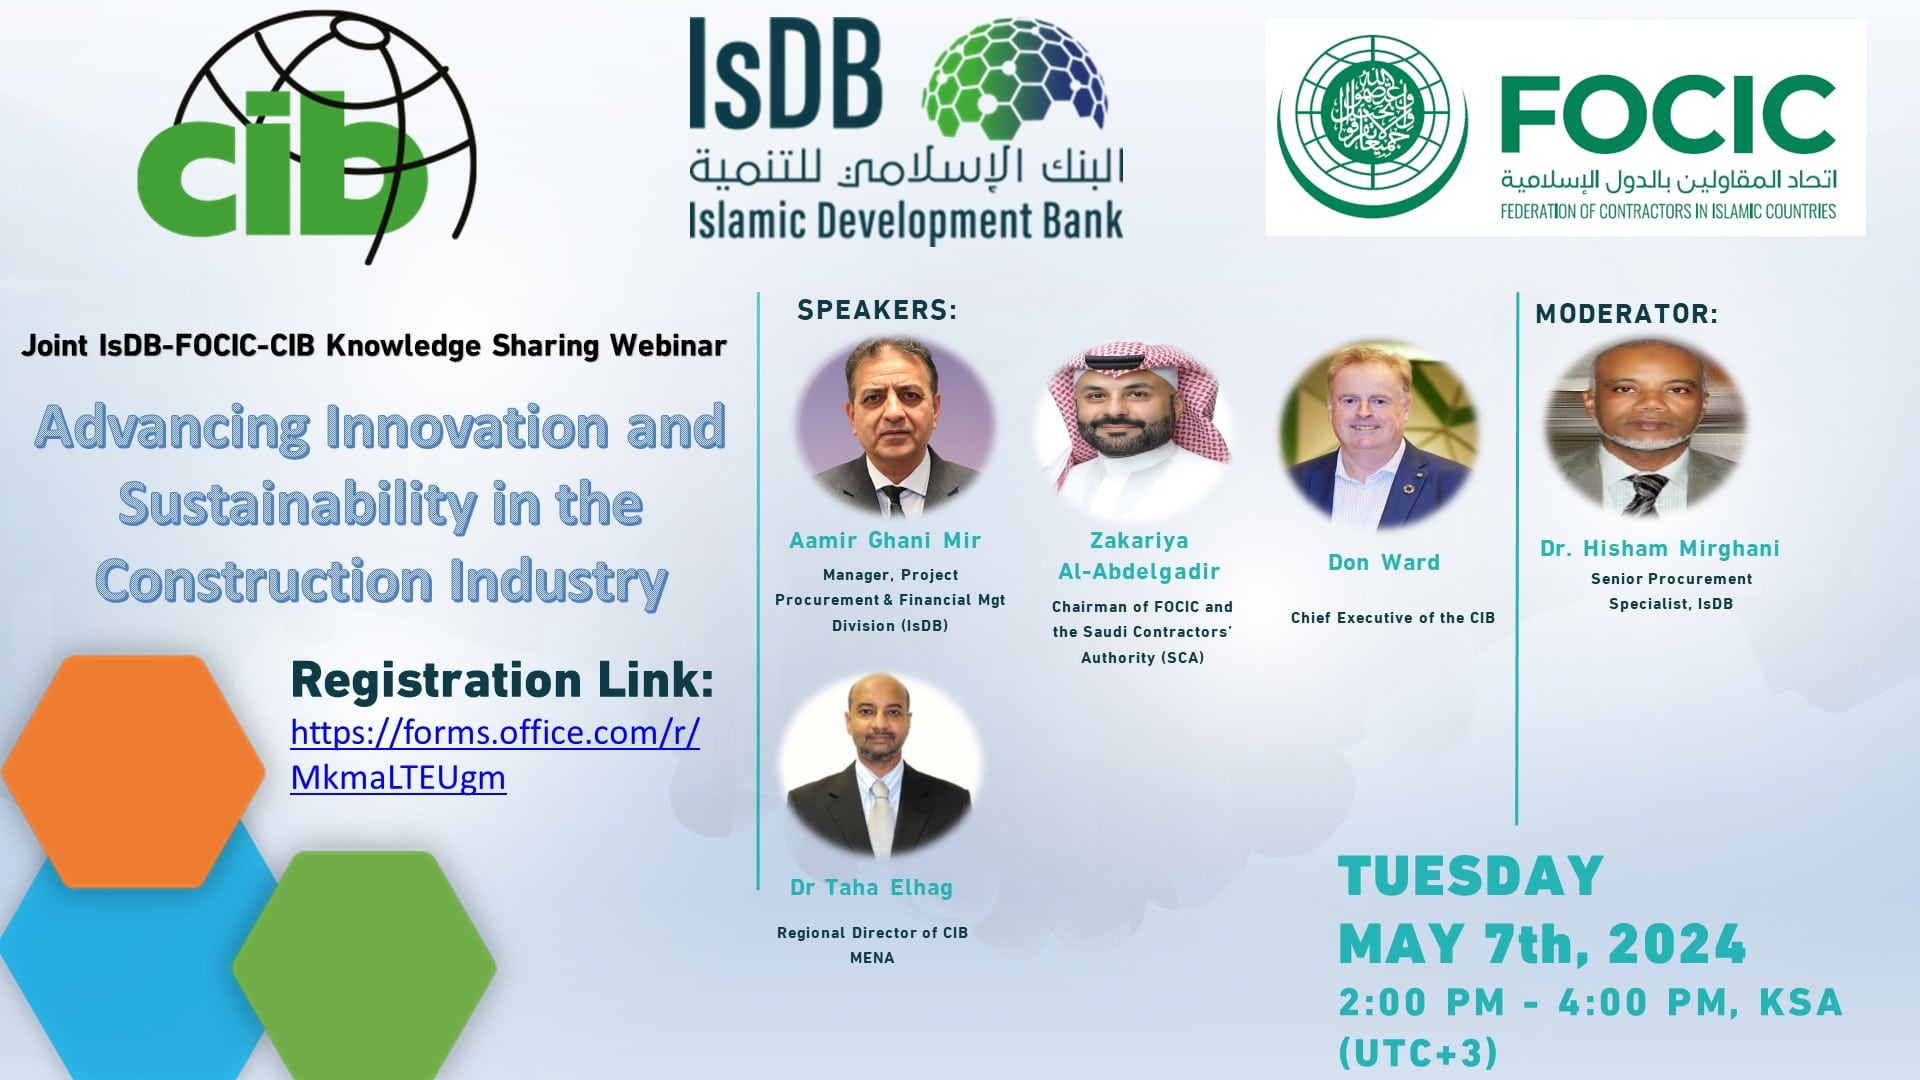 Joint IsDB-FOCIC-CIB Webinar on “Advancing Innovation and Sustainability in the Construction Industry”, 7th May 2024, 11:00 GMT